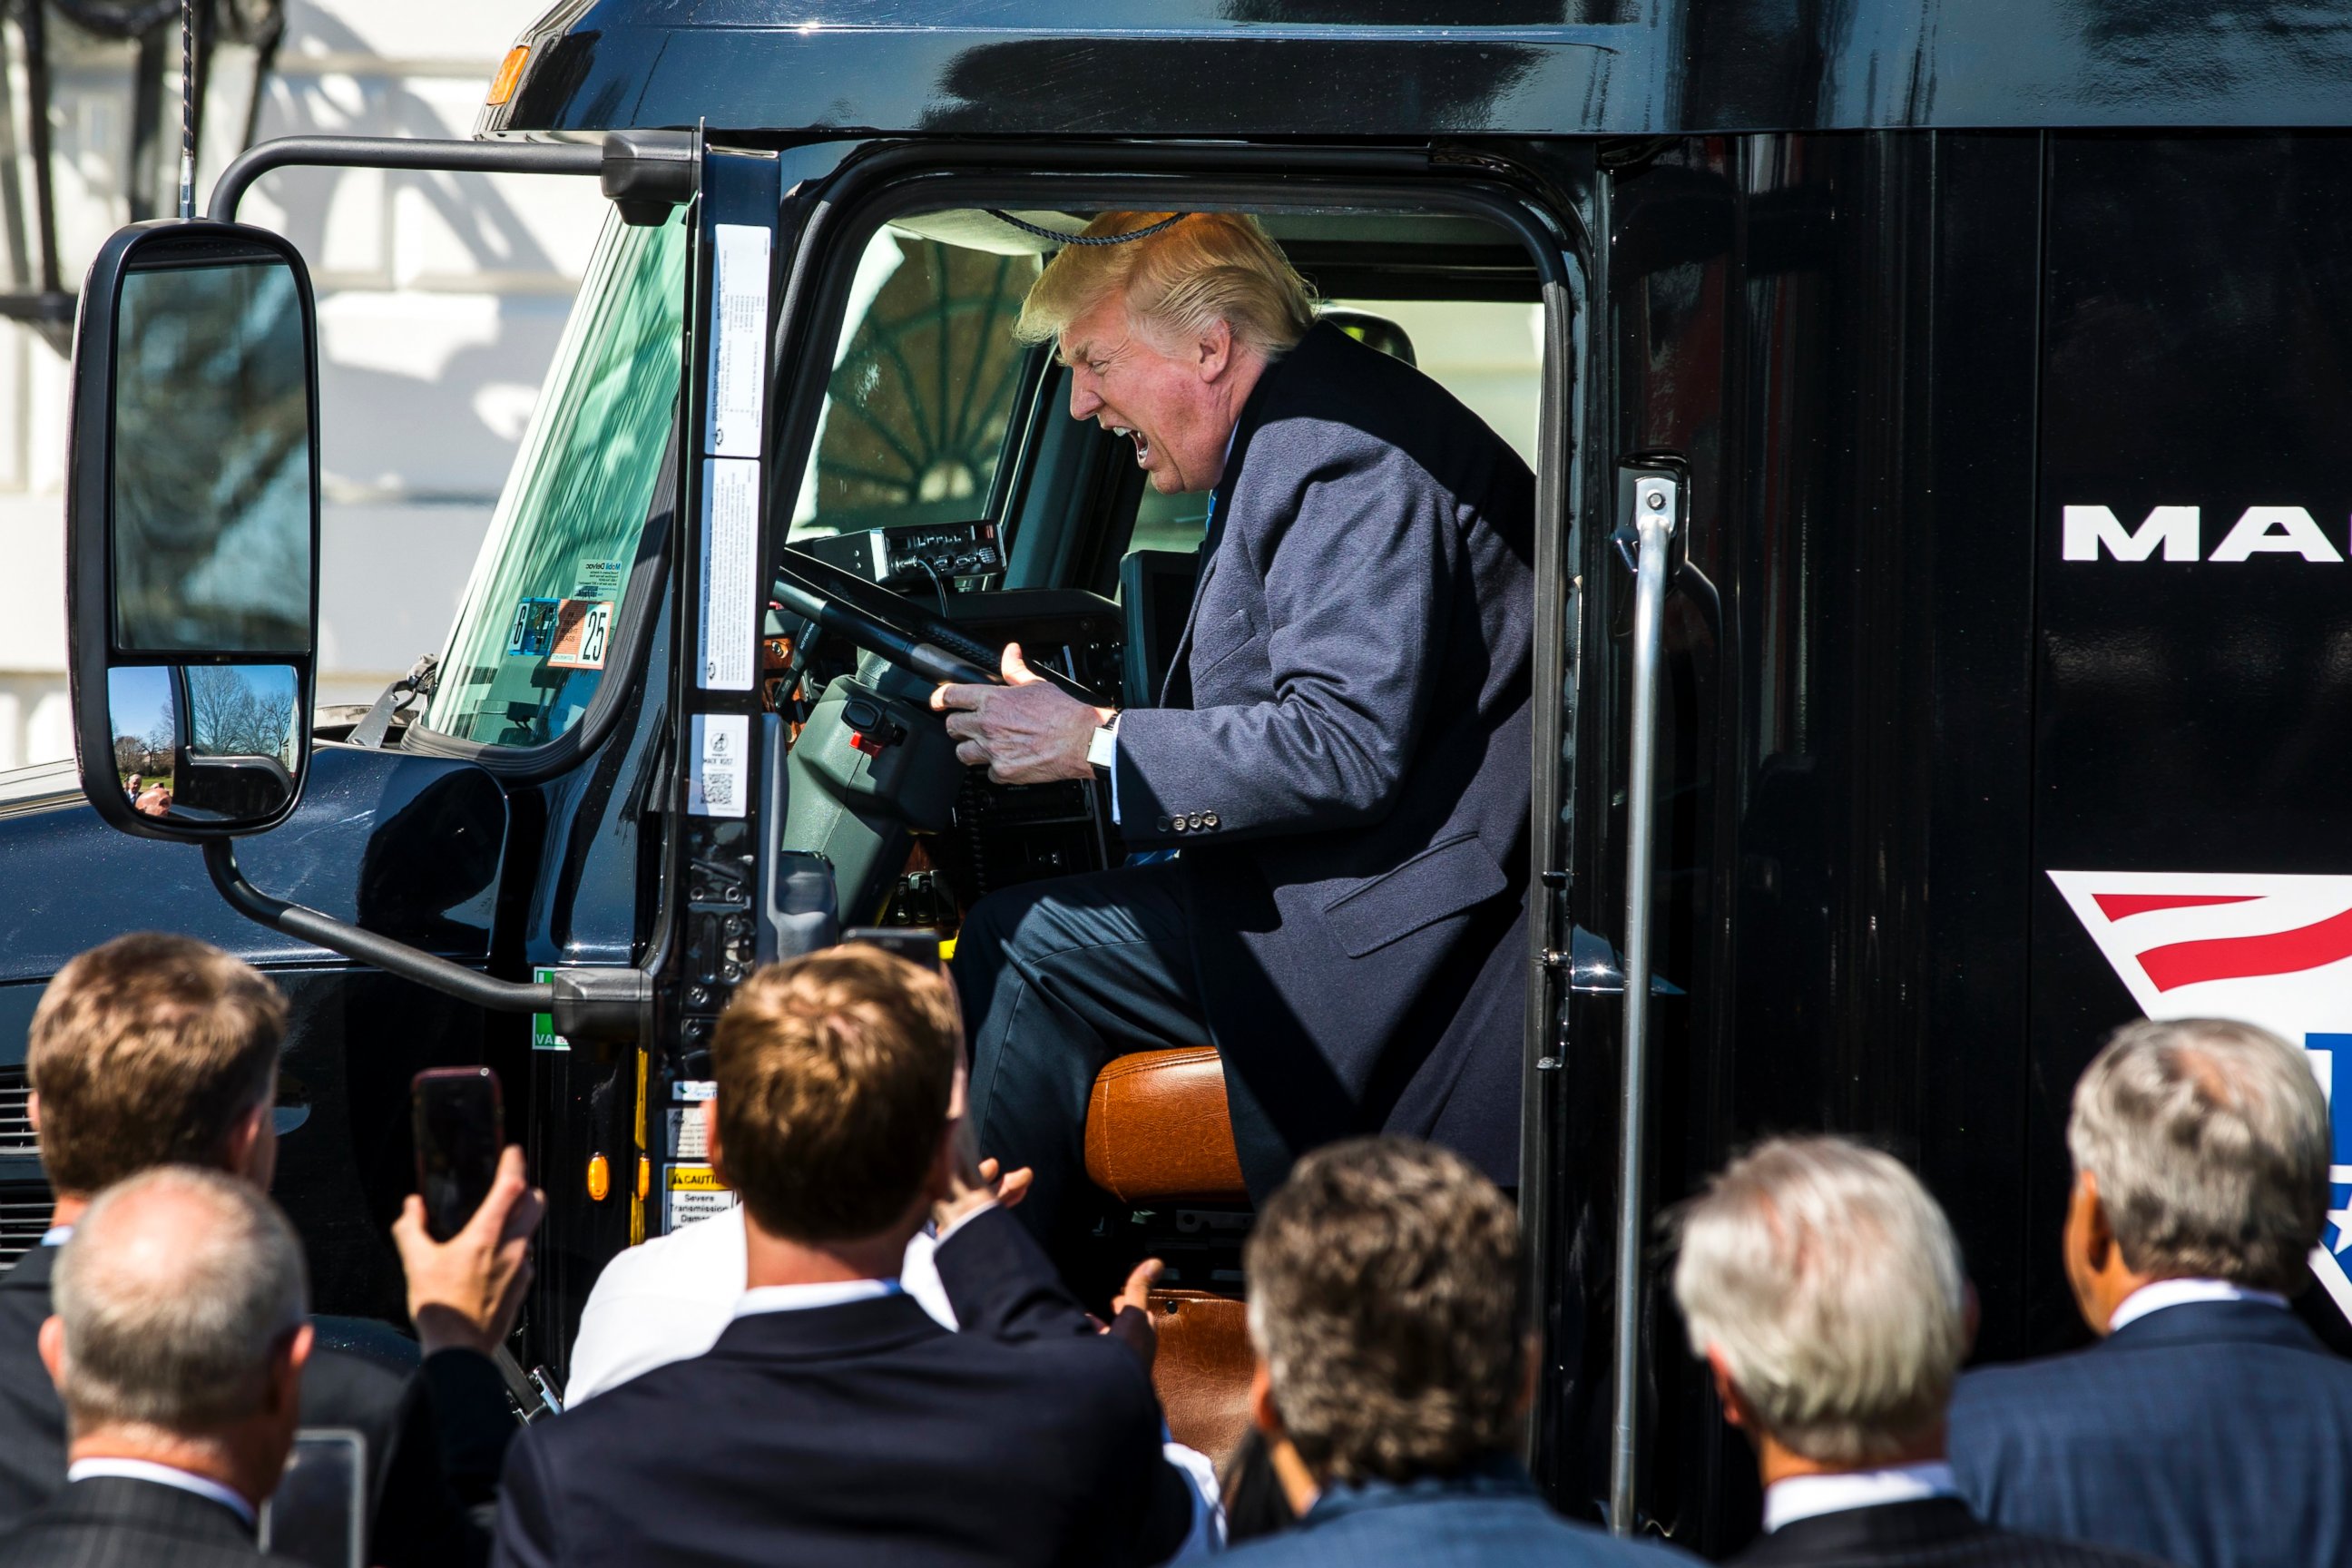 PHOTO: U.S. President Donald J. Trump gets in the driver's seat of an 18-wheeler while meeting with truck drivers and trucking CEOs on the South Portico prior to their meeting to discuss health care at the White House in Washington, March 23, 2017.